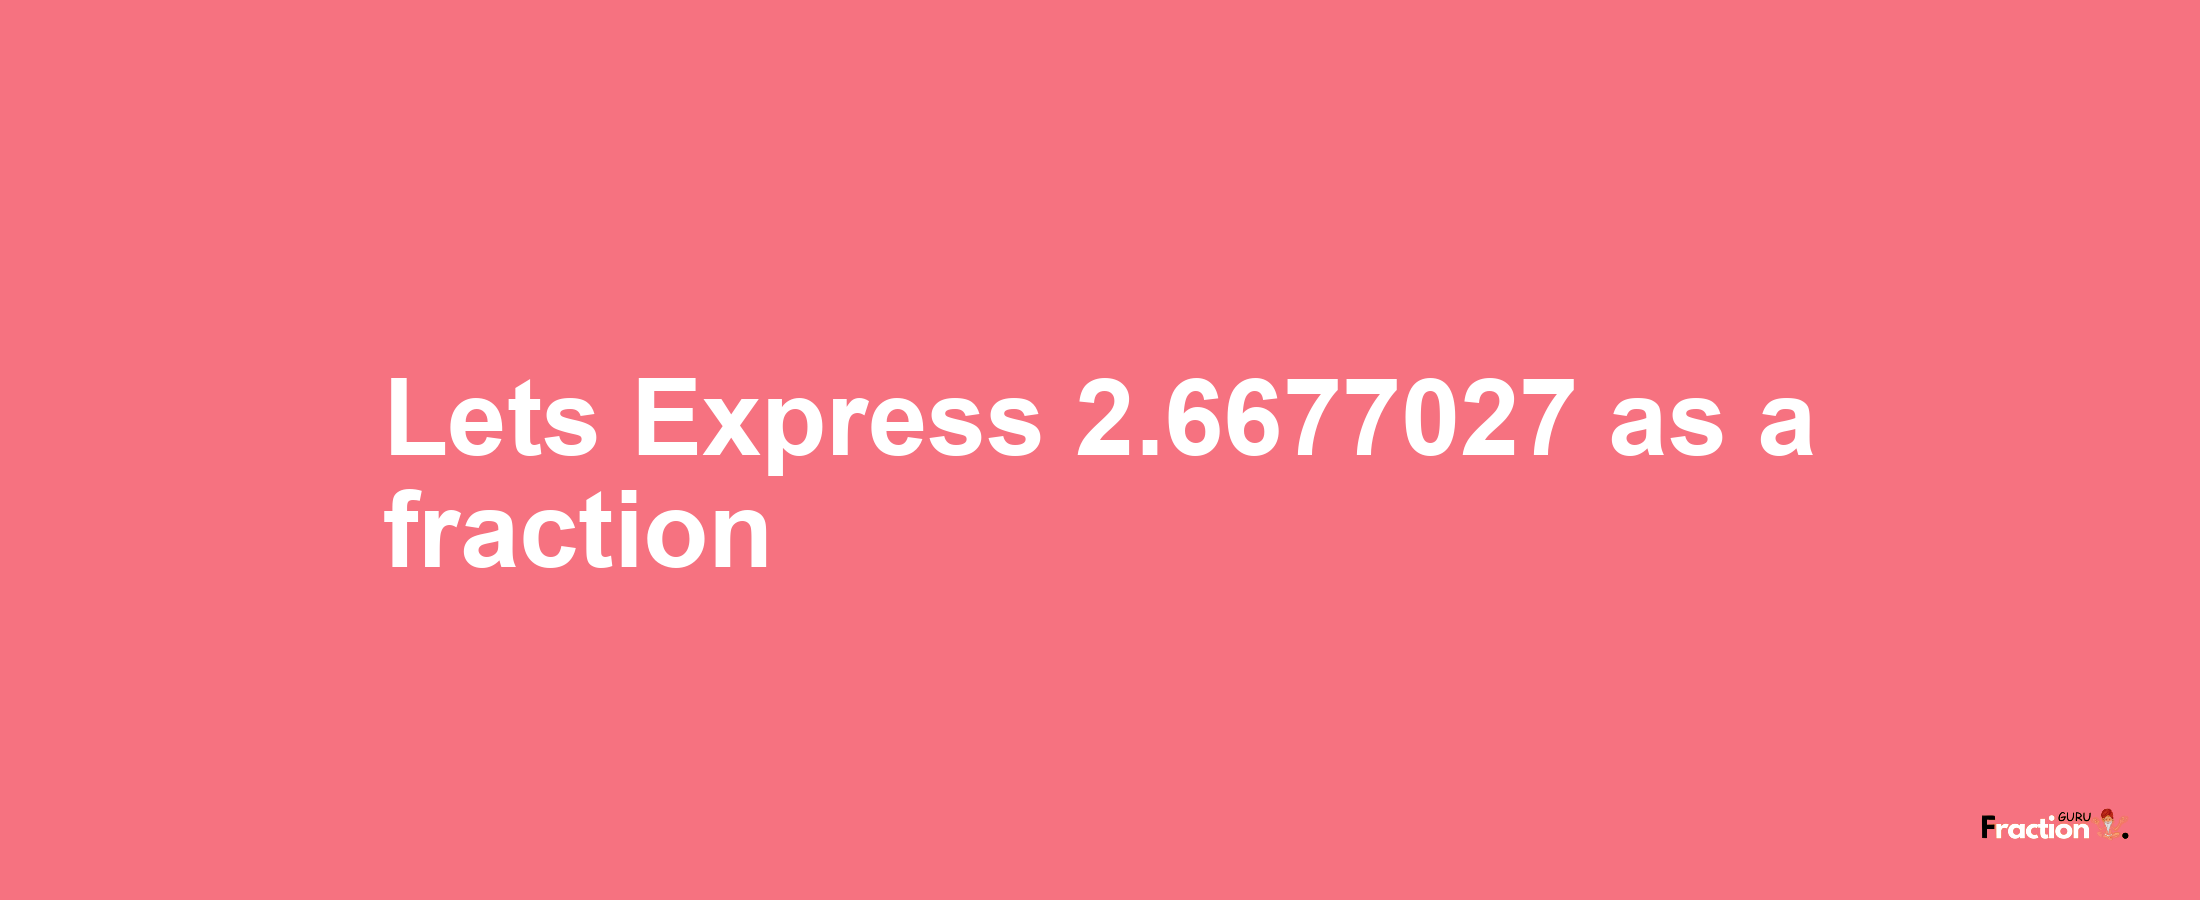 Lets Express 2.6677027 as afraction